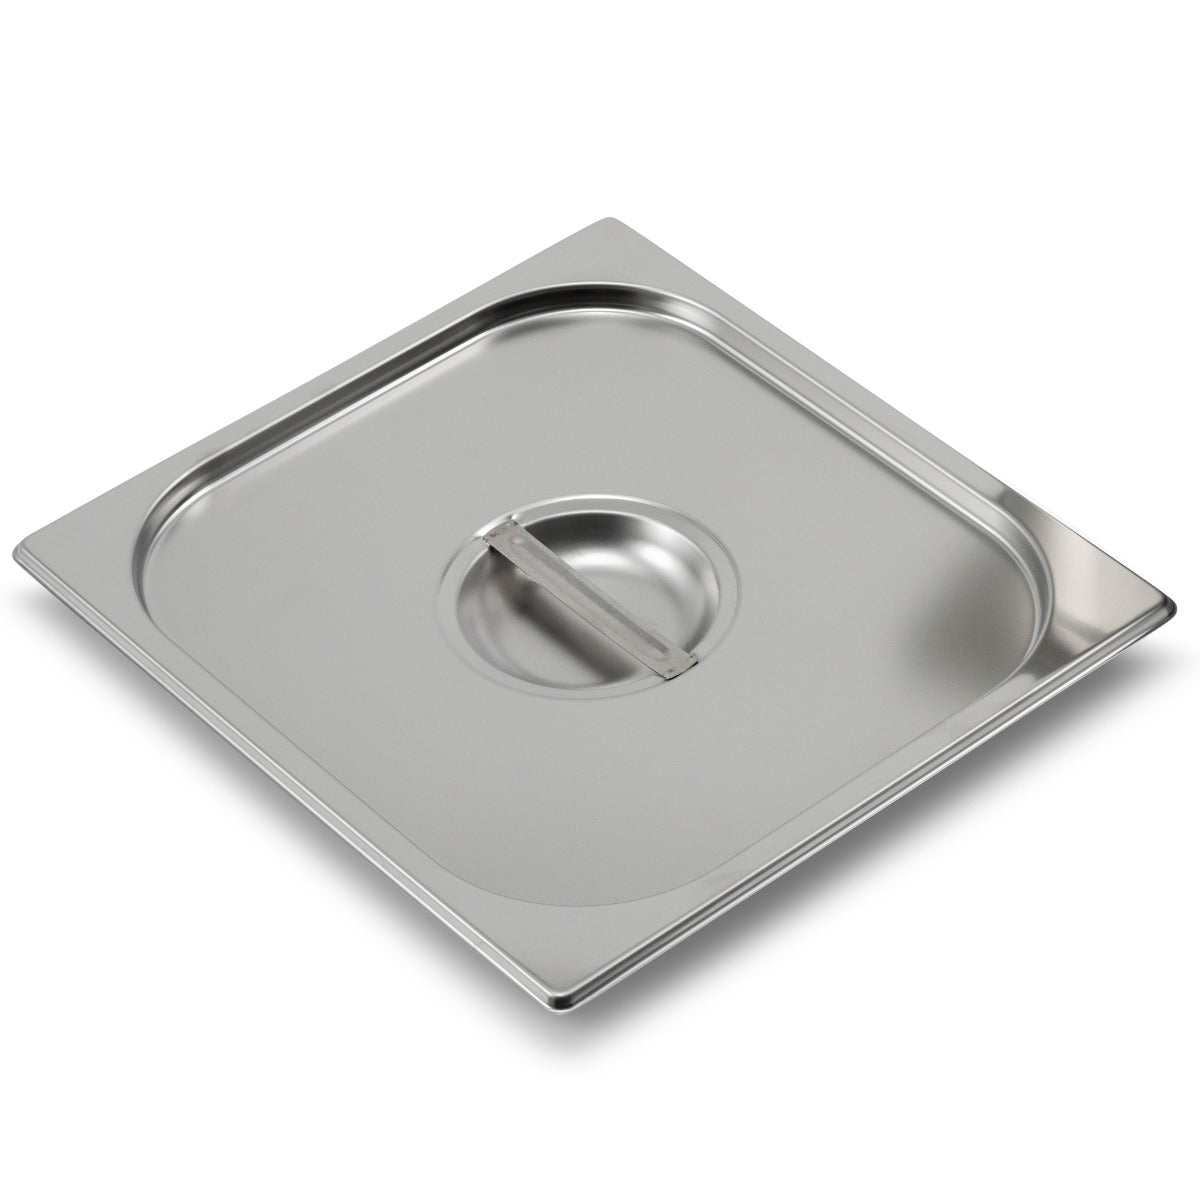 Blizzard Stainless Steel Gastronorm Lid